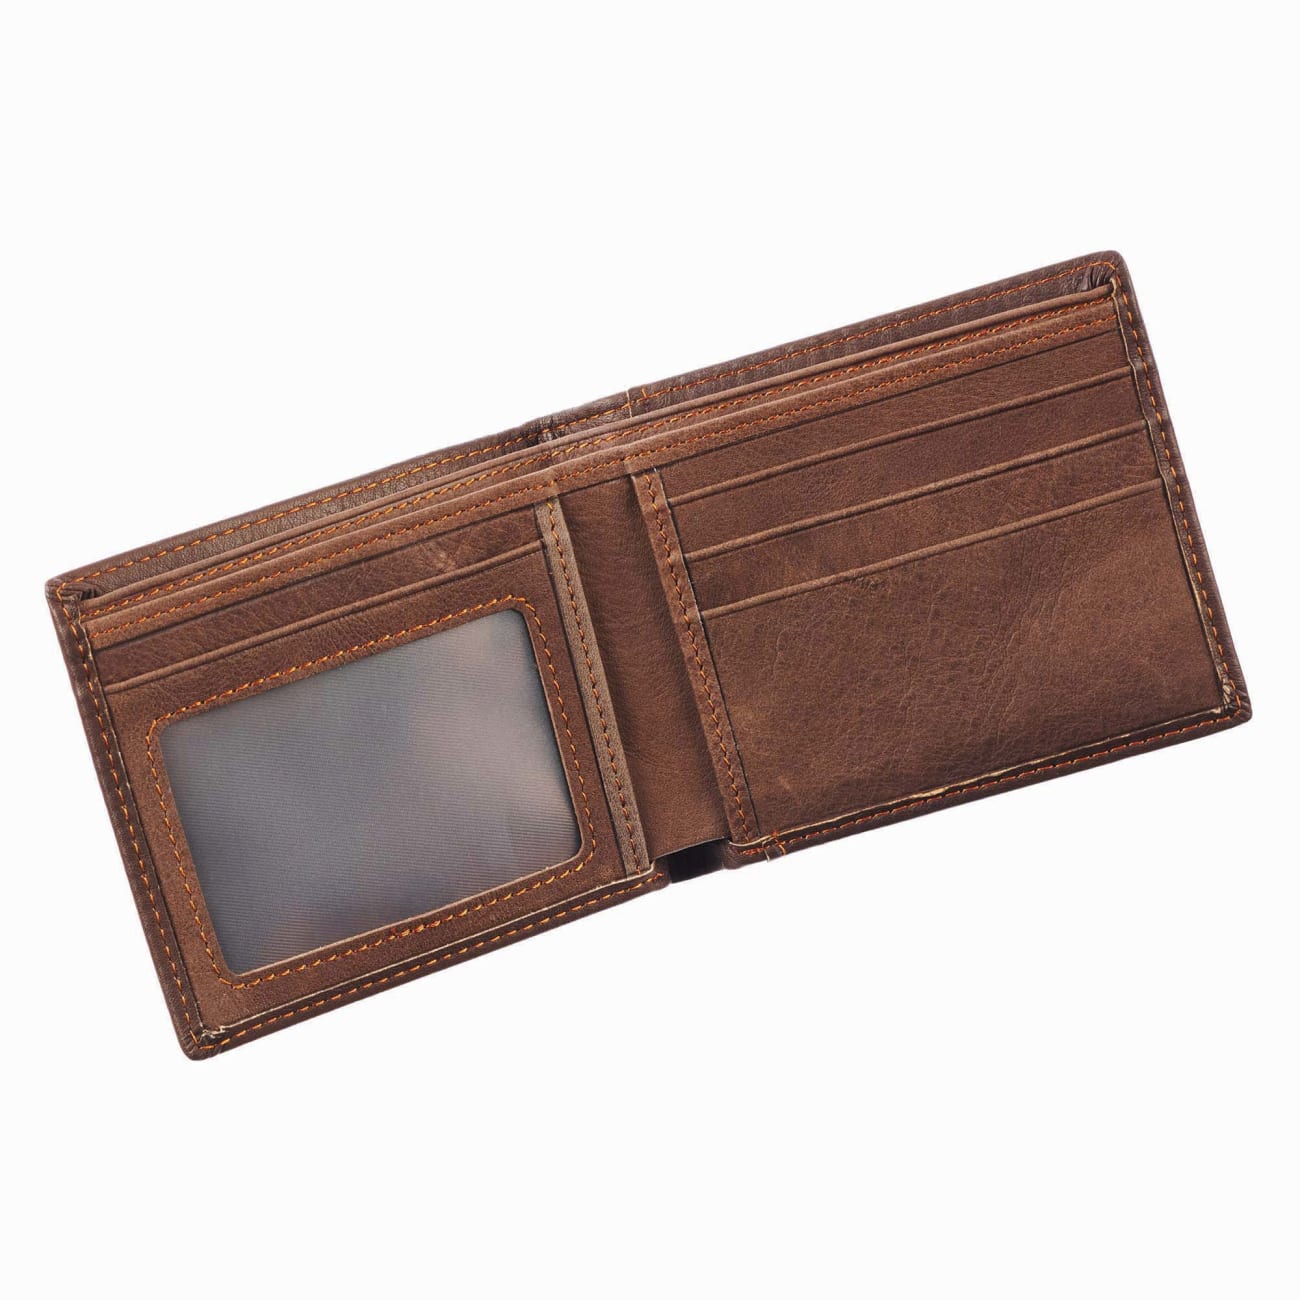 Wallet Brown, 2 Section, Bi-Fold (Jer 17: 7) (Blessed Man Collection) Genuine Leather